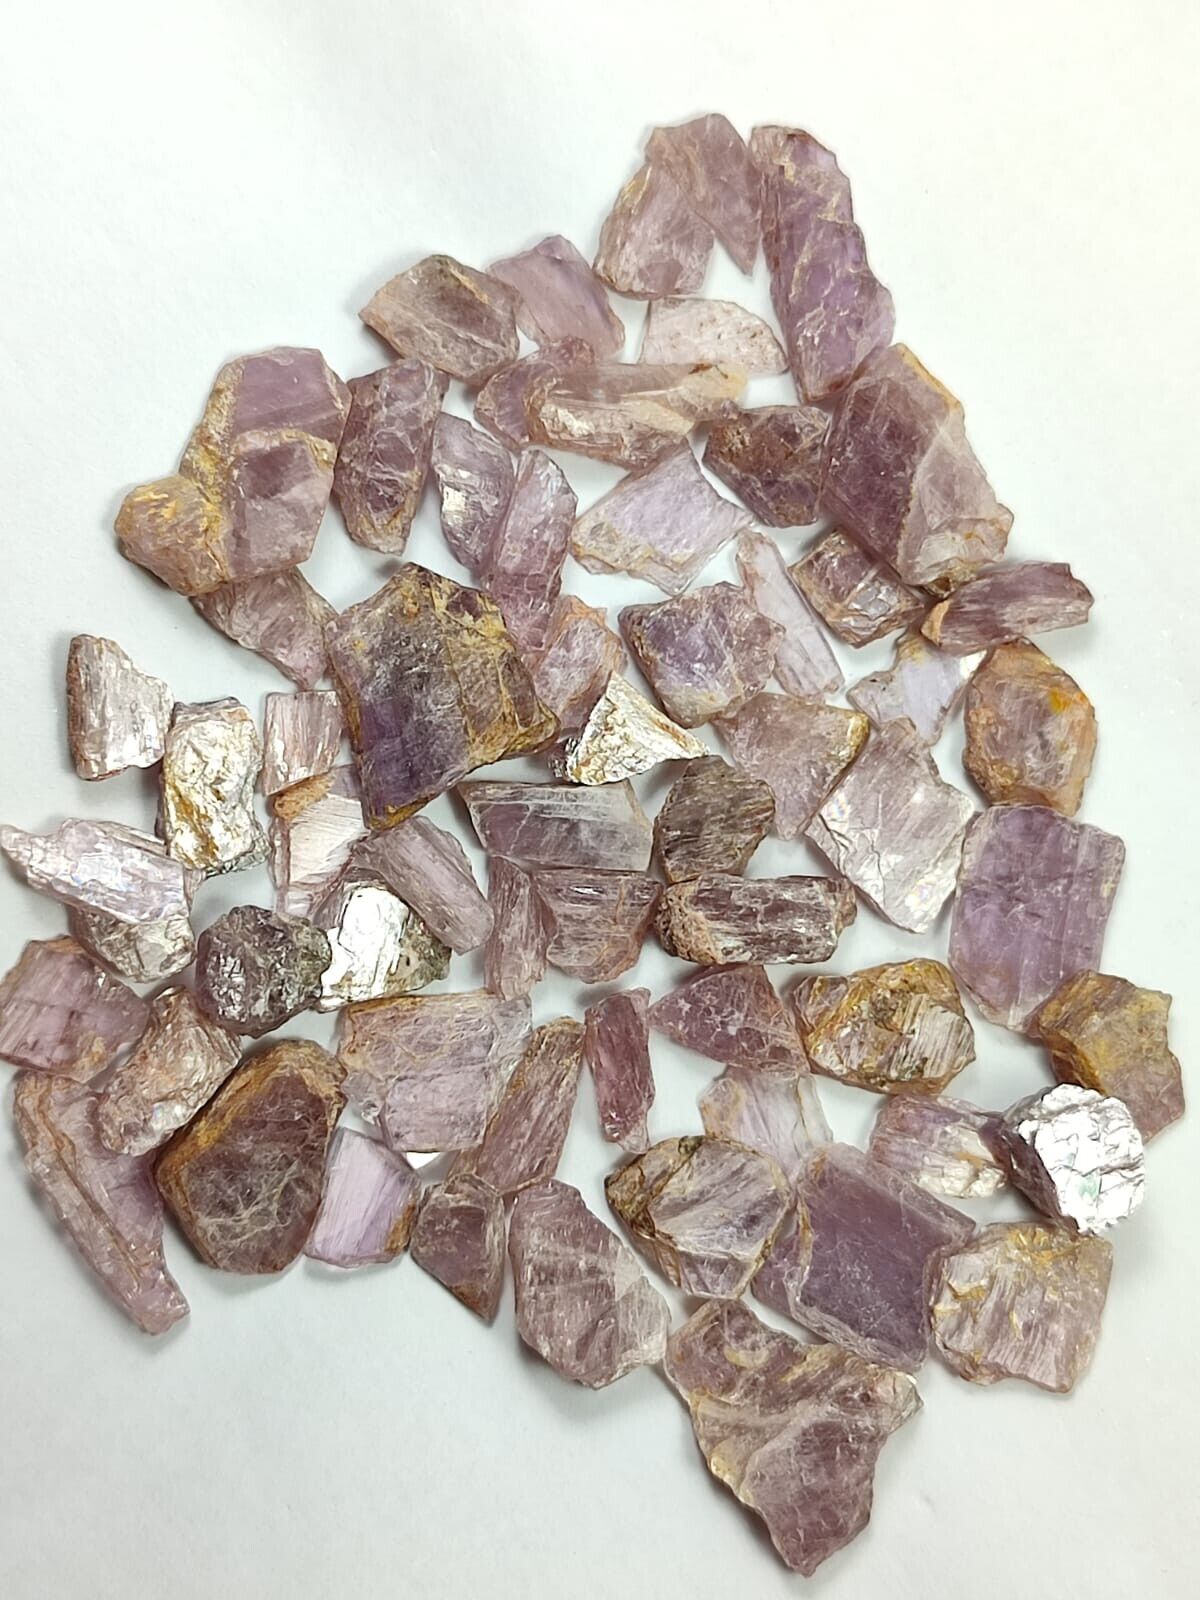 80-gm New Find Purplish Pink Diaspore Crystals from Afghanistan (60 PCs)